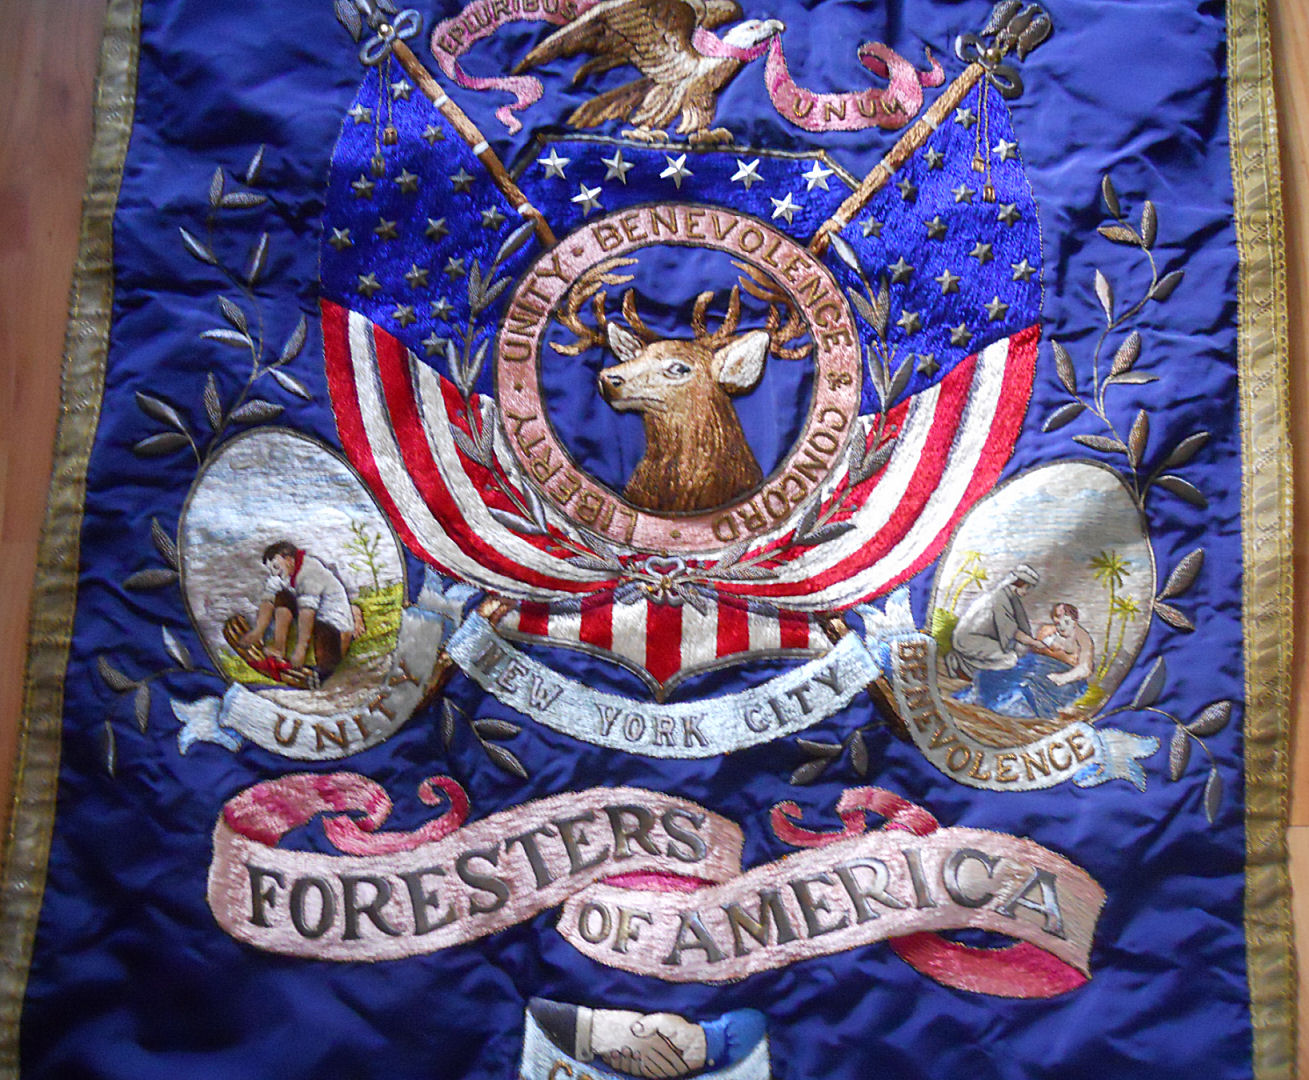 Download this This Banner Was The Property Foresters America Court Fordham picture